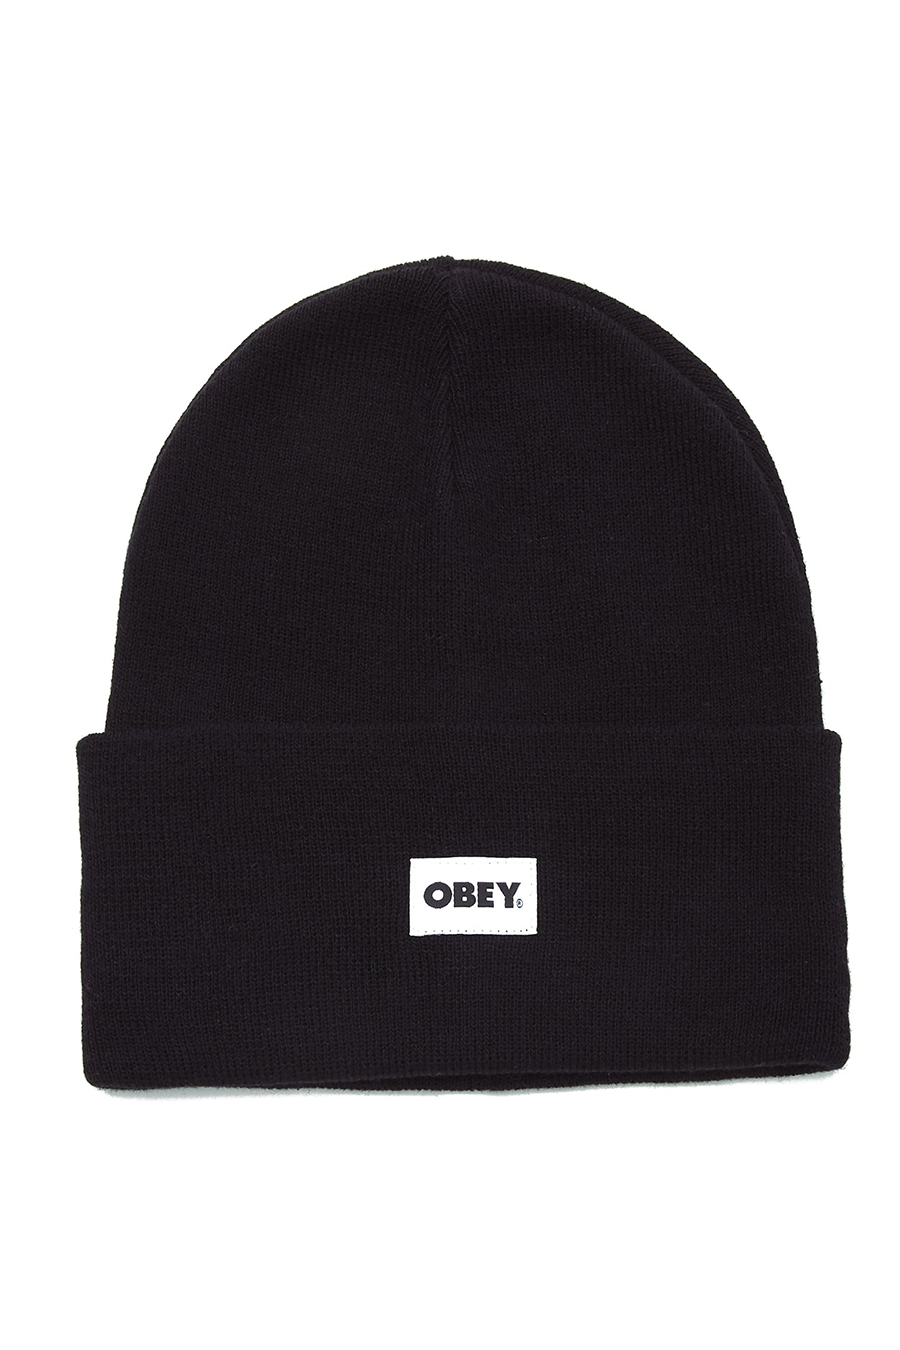 Bold Label Organic Beanie | Black - Main Image Number 1 of 1